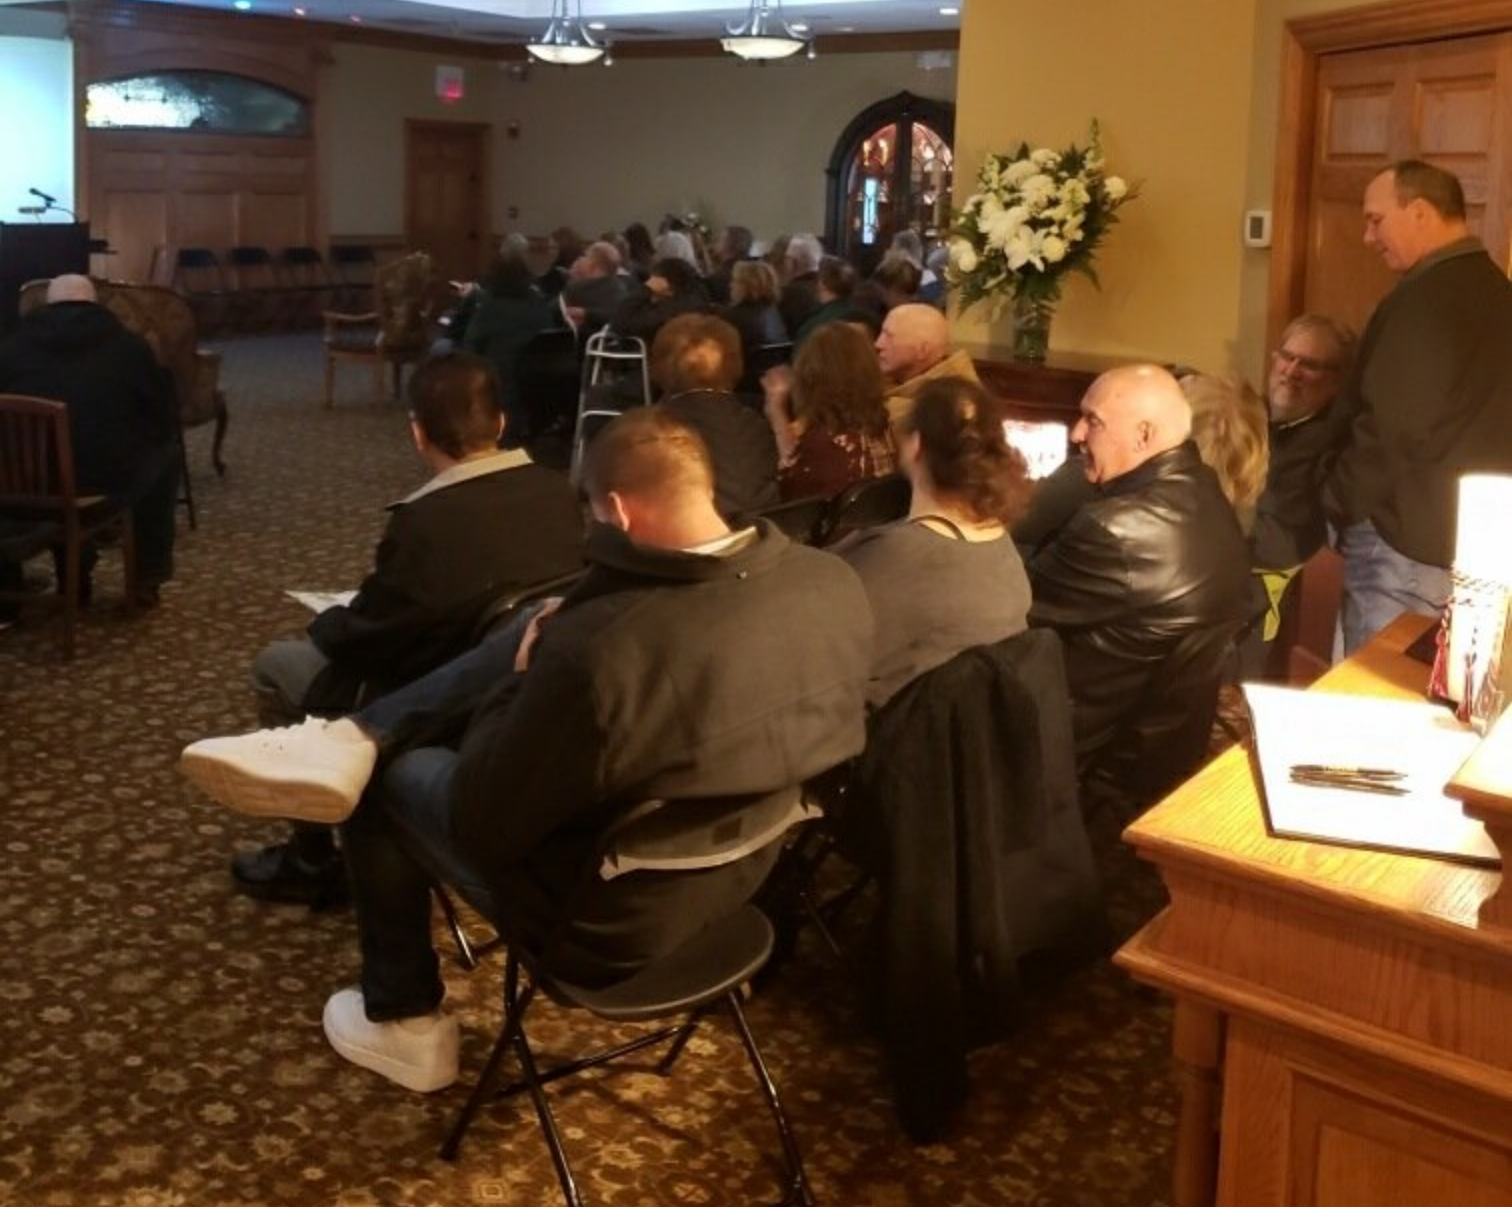 Countryside Funeral Homes - Candlelight Memorial Service 2018